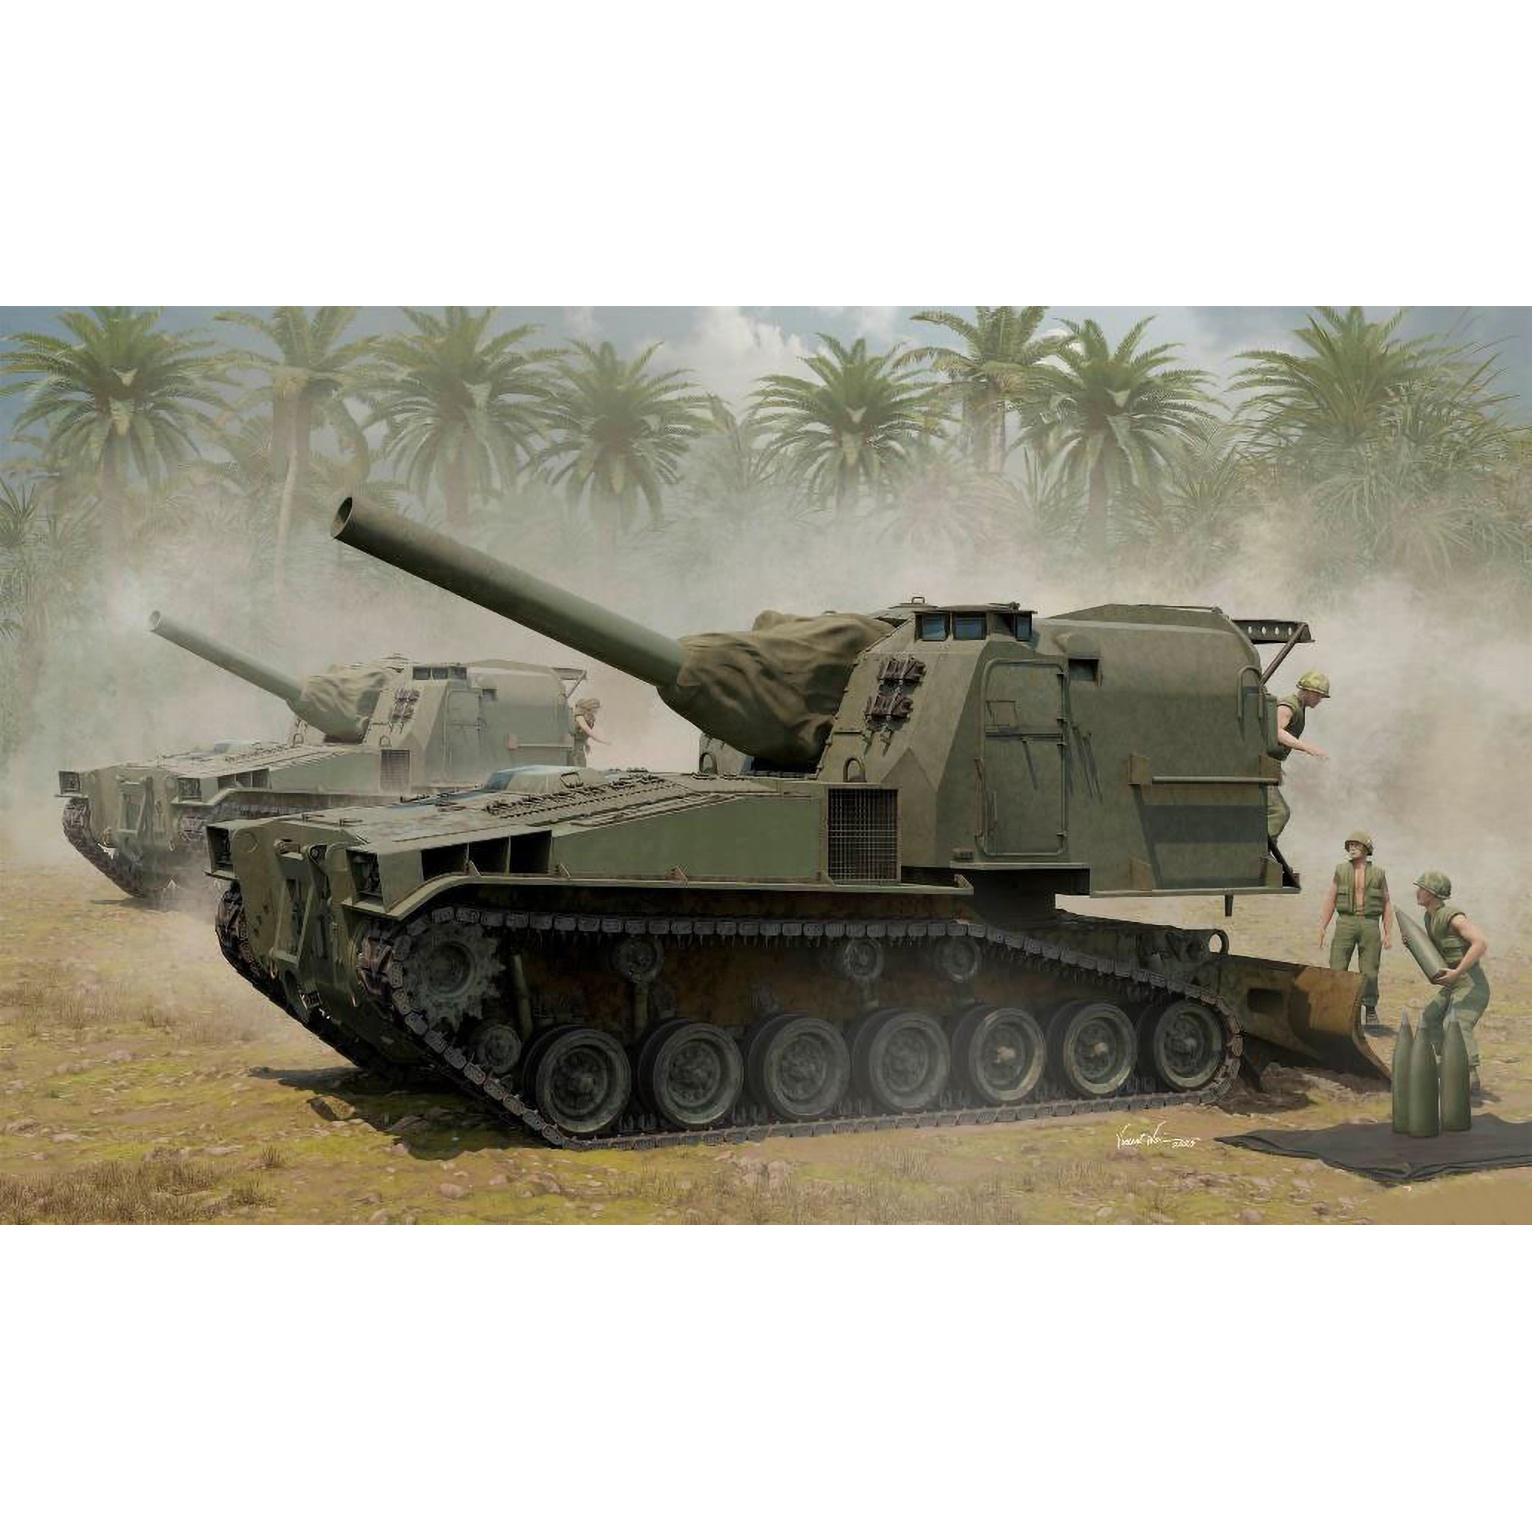 63548 I Love Kit 1/35 M55 Self-propelled Howitzer with 203mm Cannon